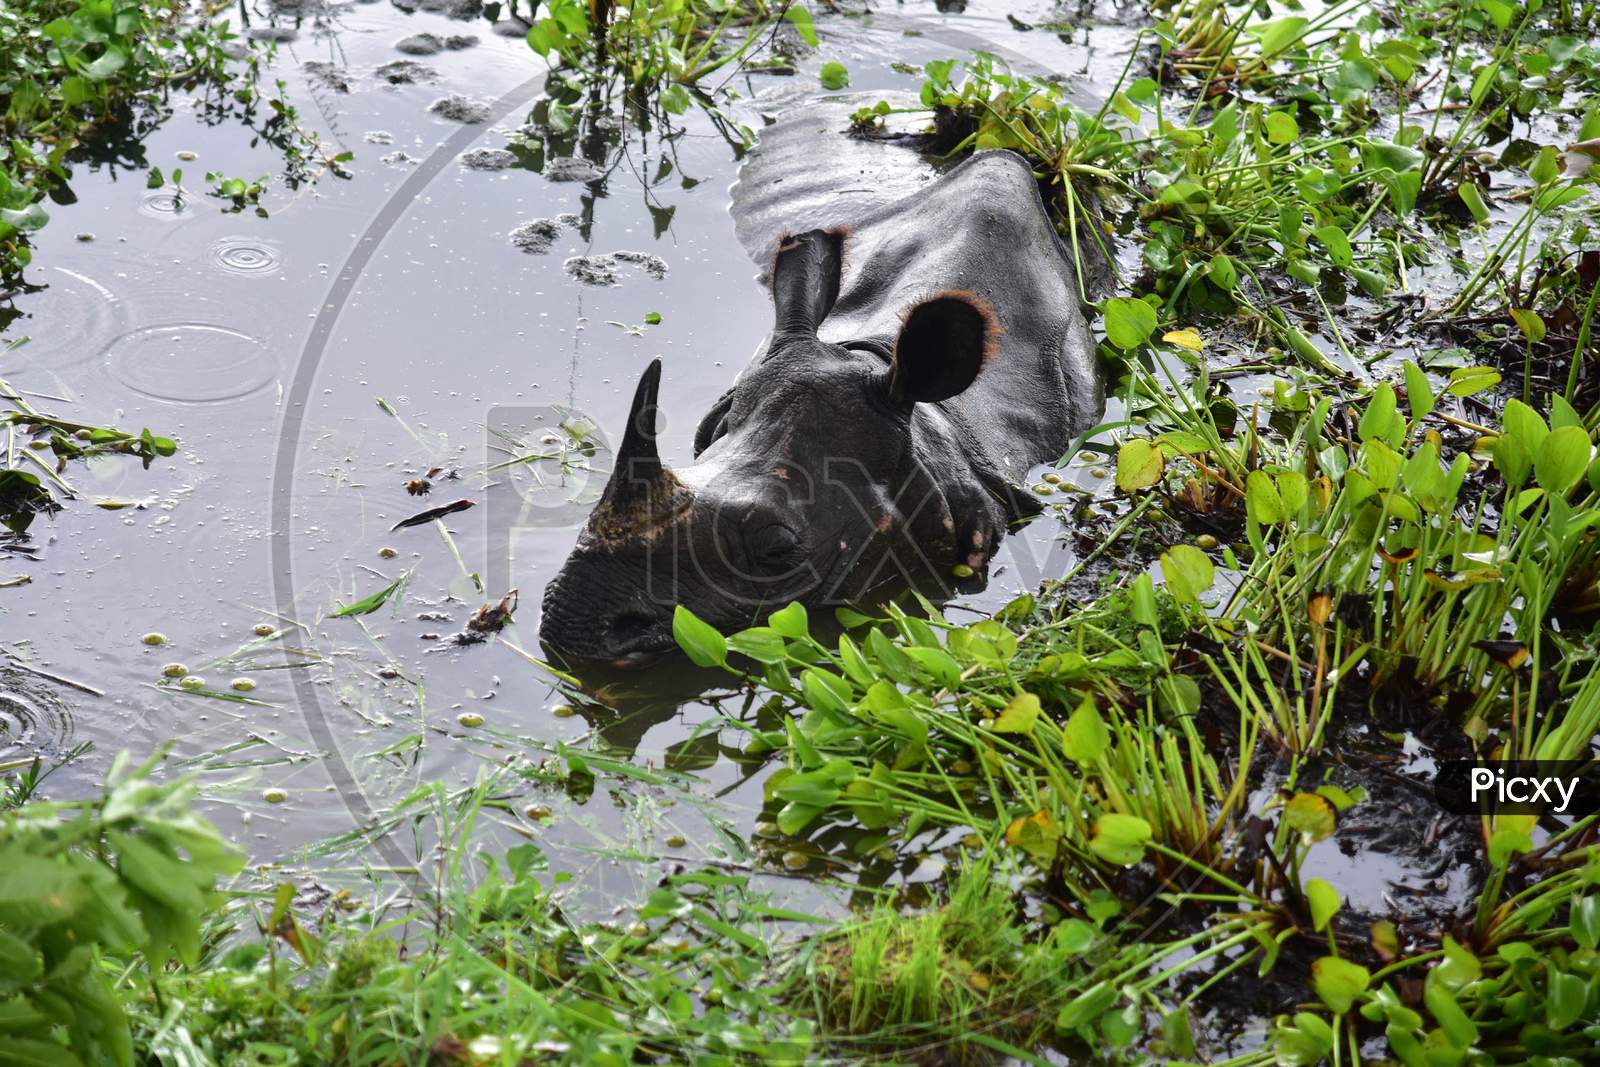 A rhino rests near National Highway 37 as the Kaziranga National Park got flooded in Nagaon, Assam on July 18, 2020